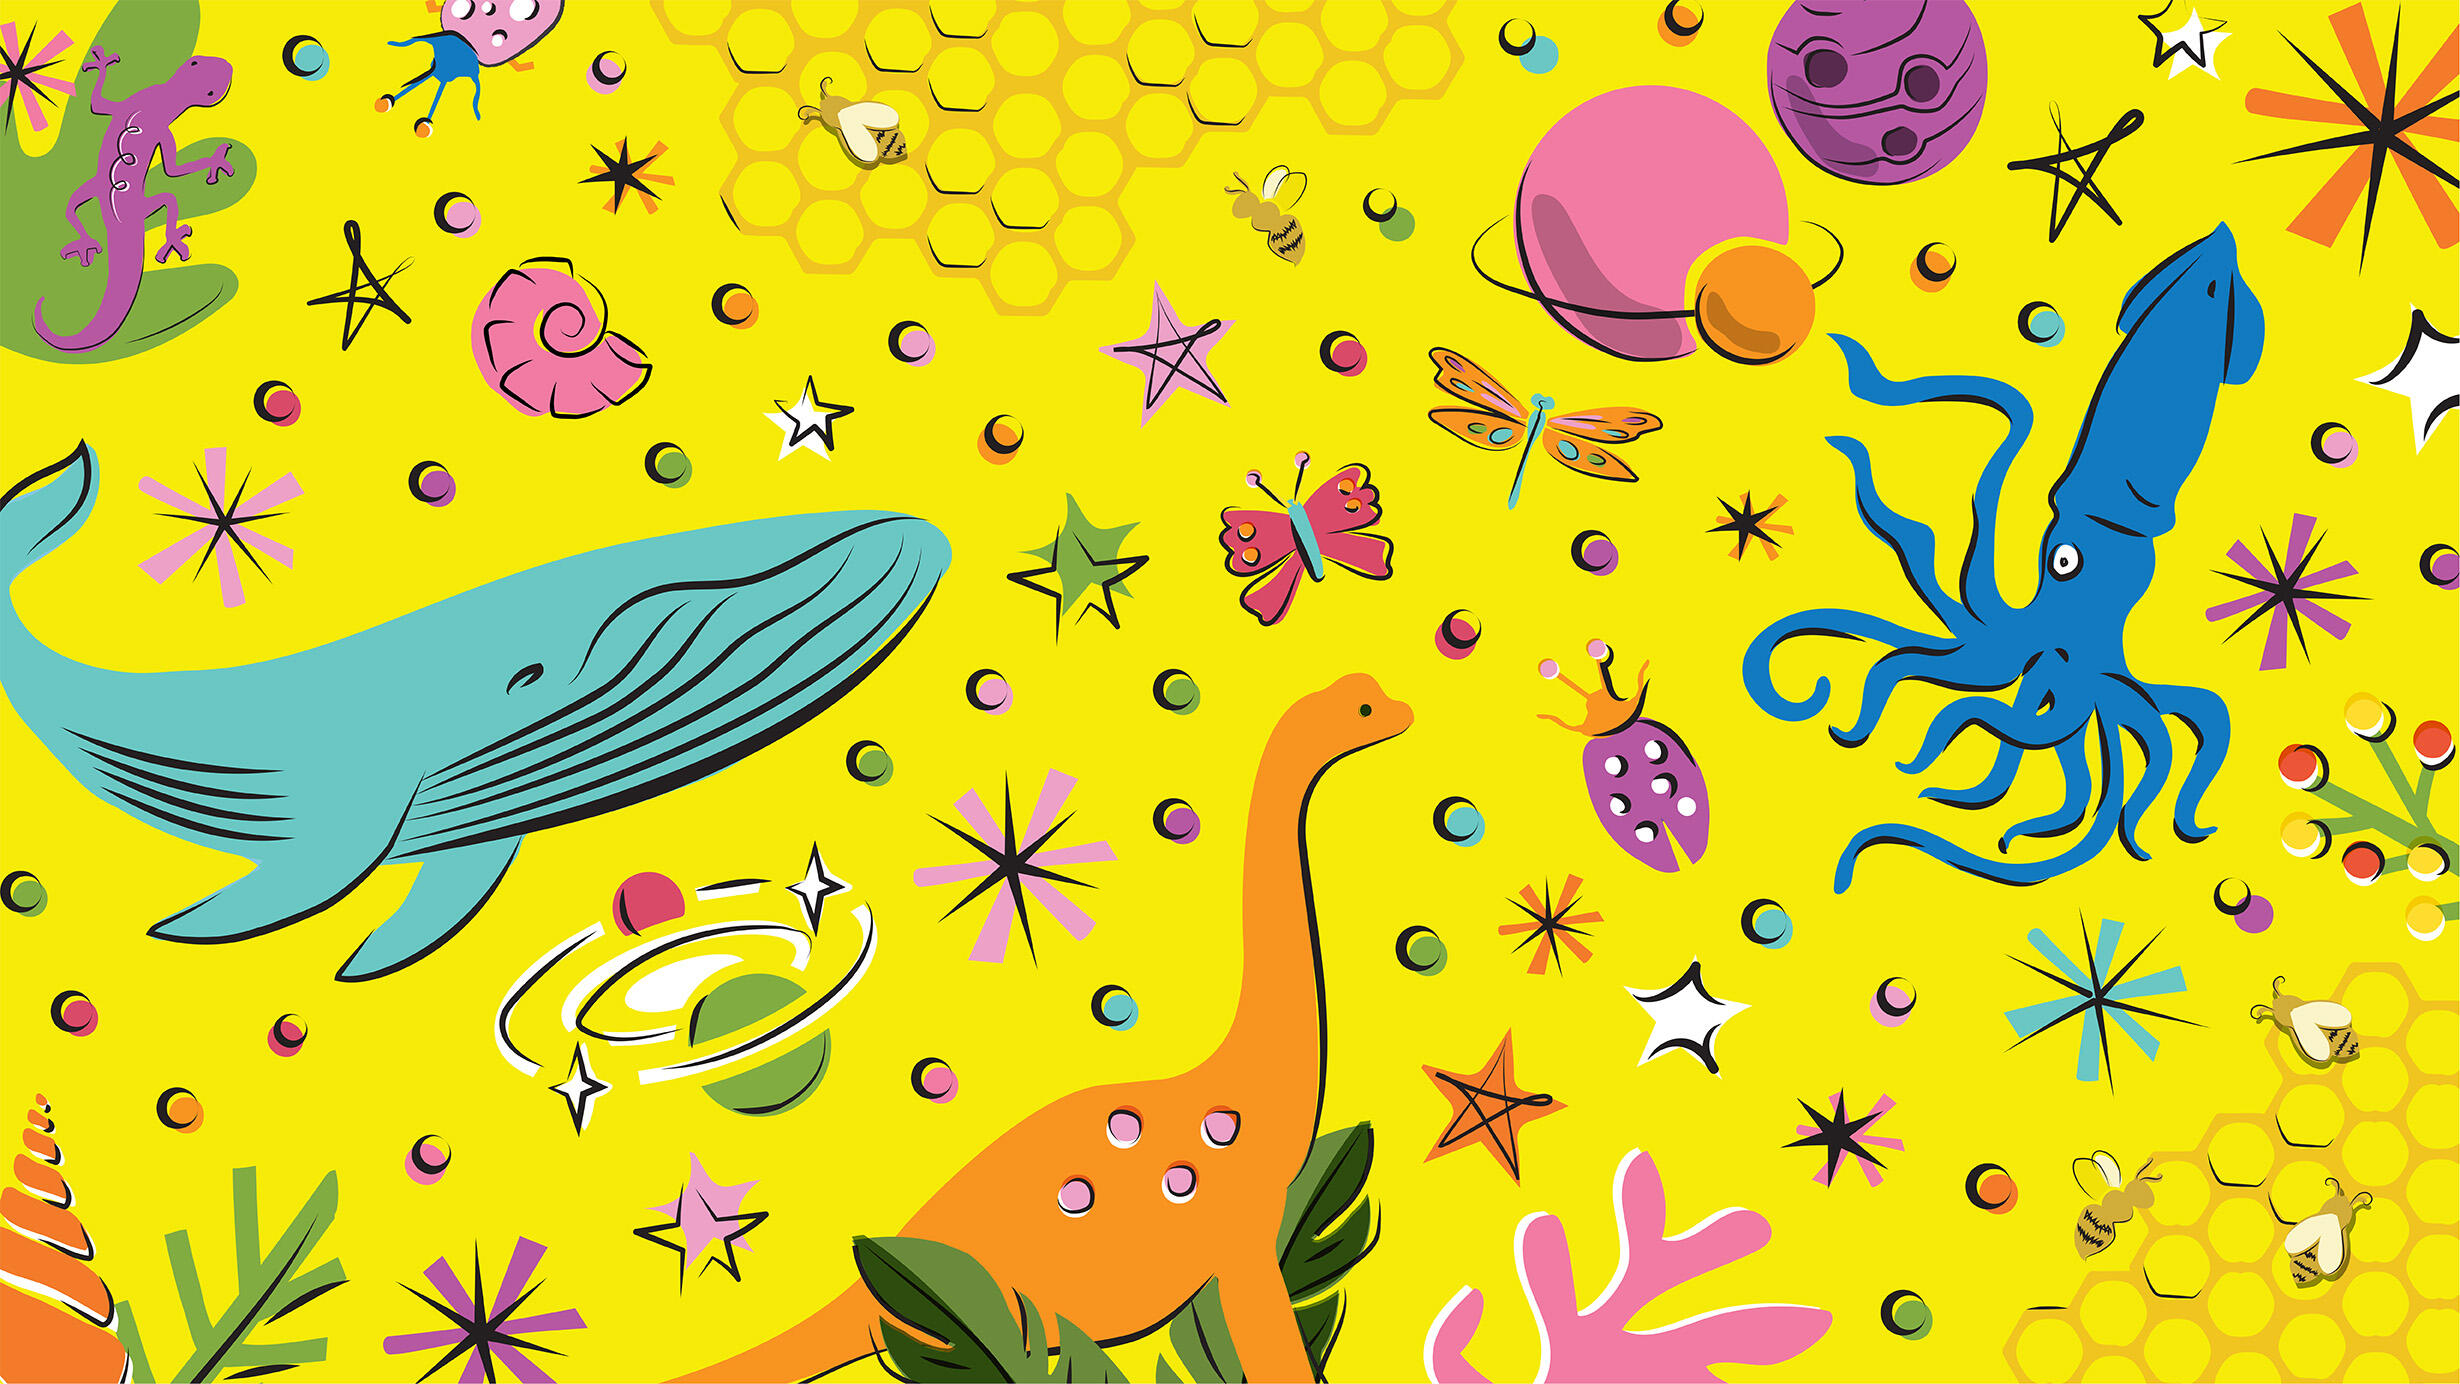 illustrations of a blue whale, barosaurus, squid, planets, shells, stars, insects and honeycomb against a yellow background.